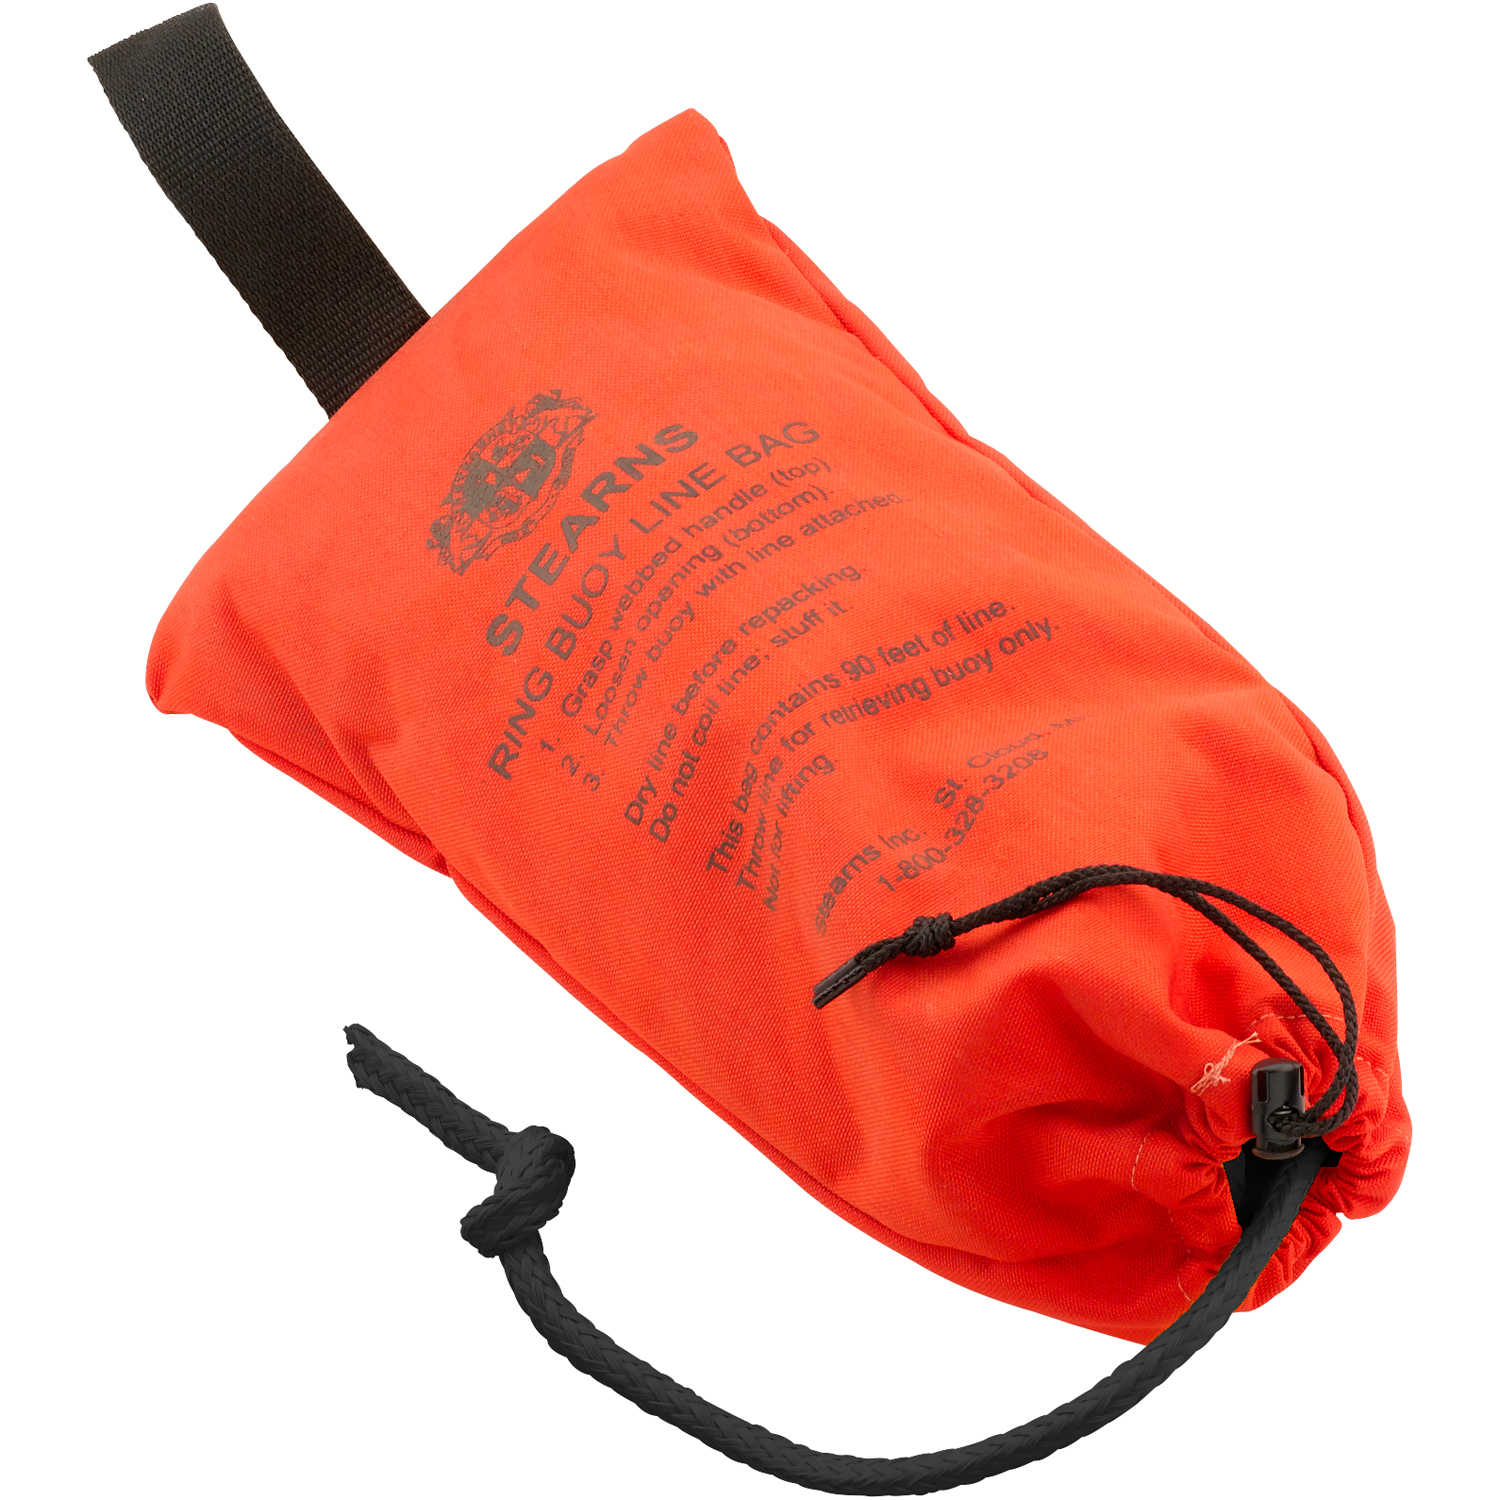 Stearns Ring Buoy Rope with Bag | eBay